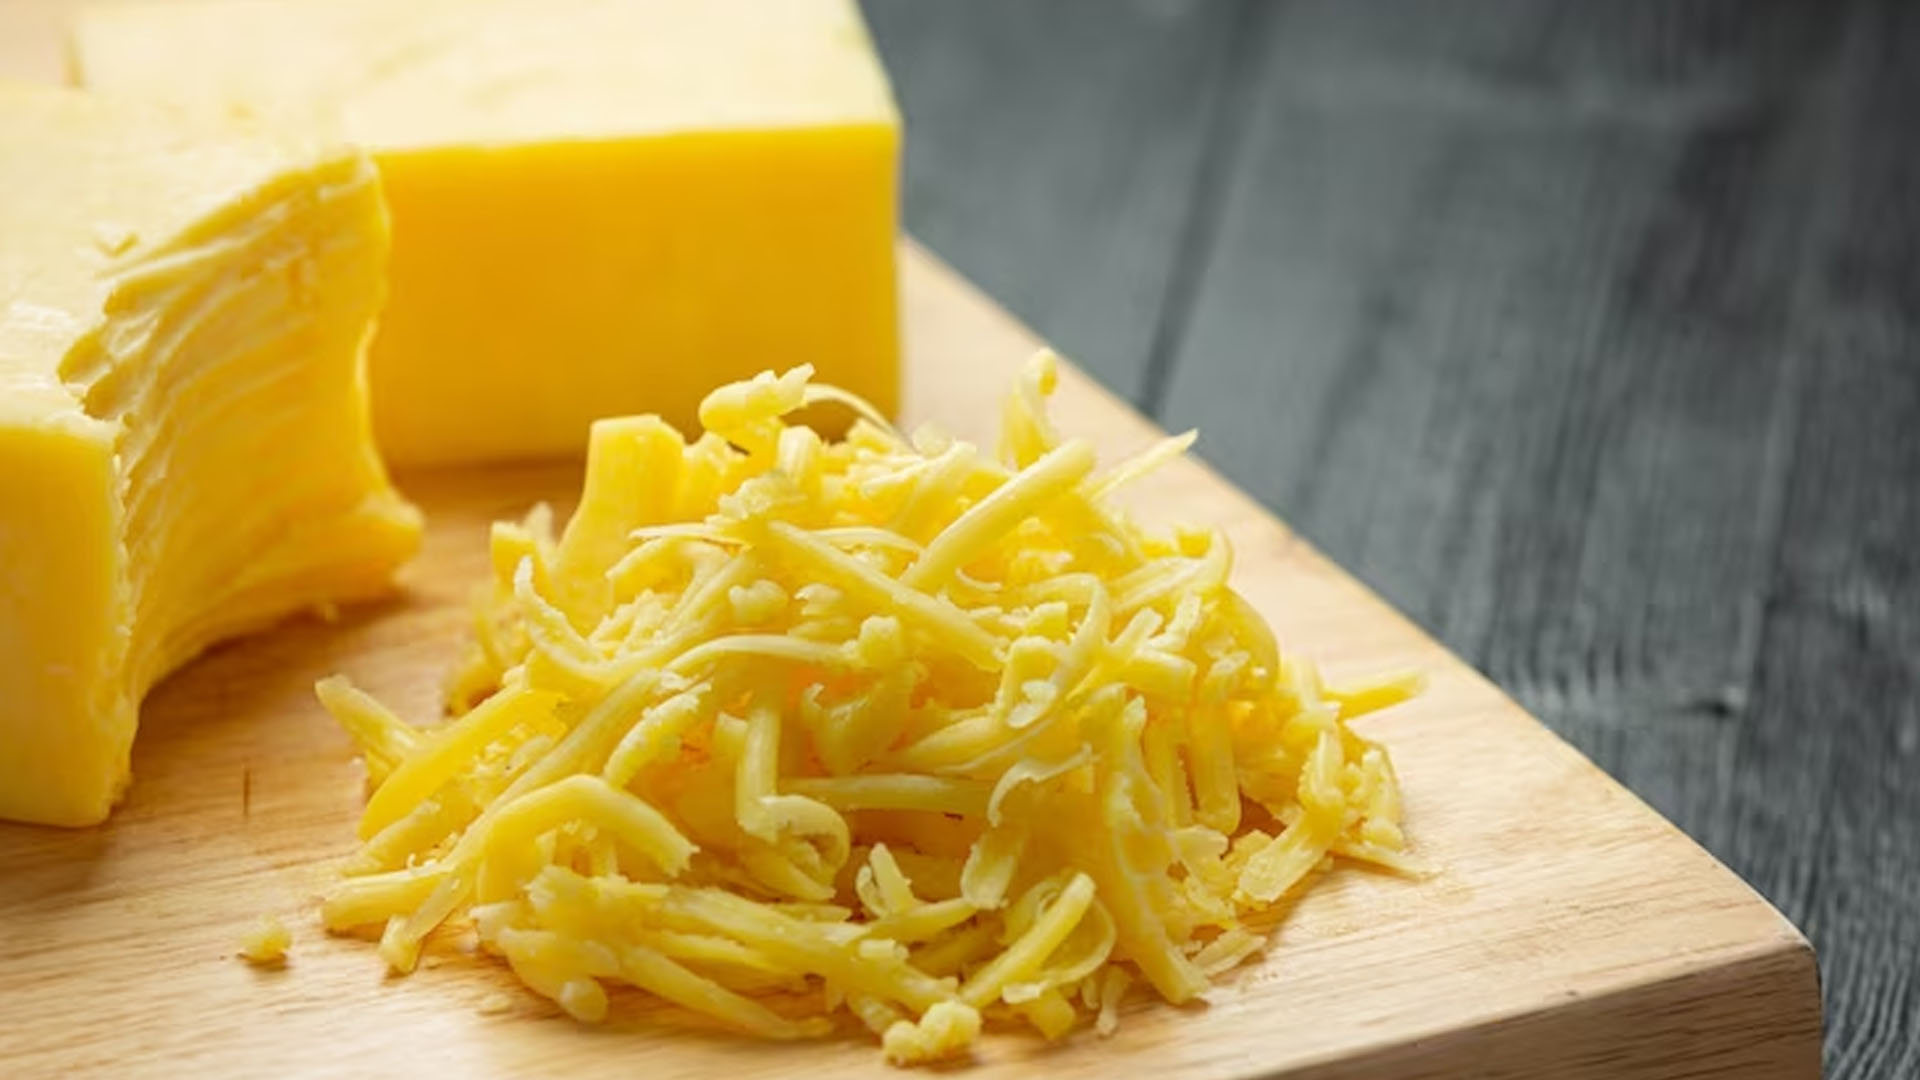 Does Cheddar Cheese Have Health Benefits?